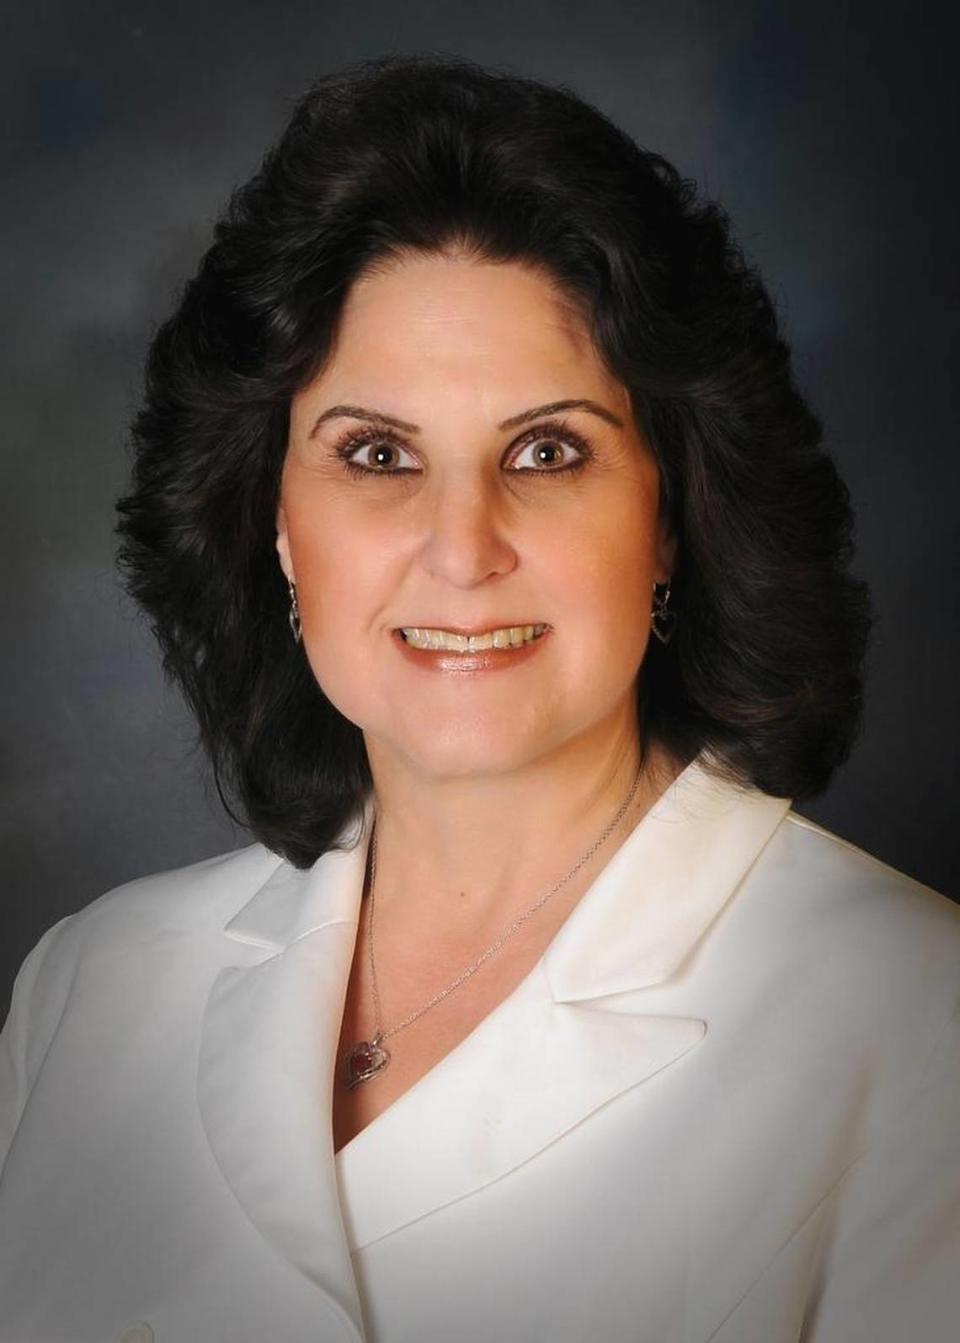 Sharon Ullman is a Republican challenger for Ada County Commissioner, District 3. She previously served as a commissioner in two nonconsecutive terms.